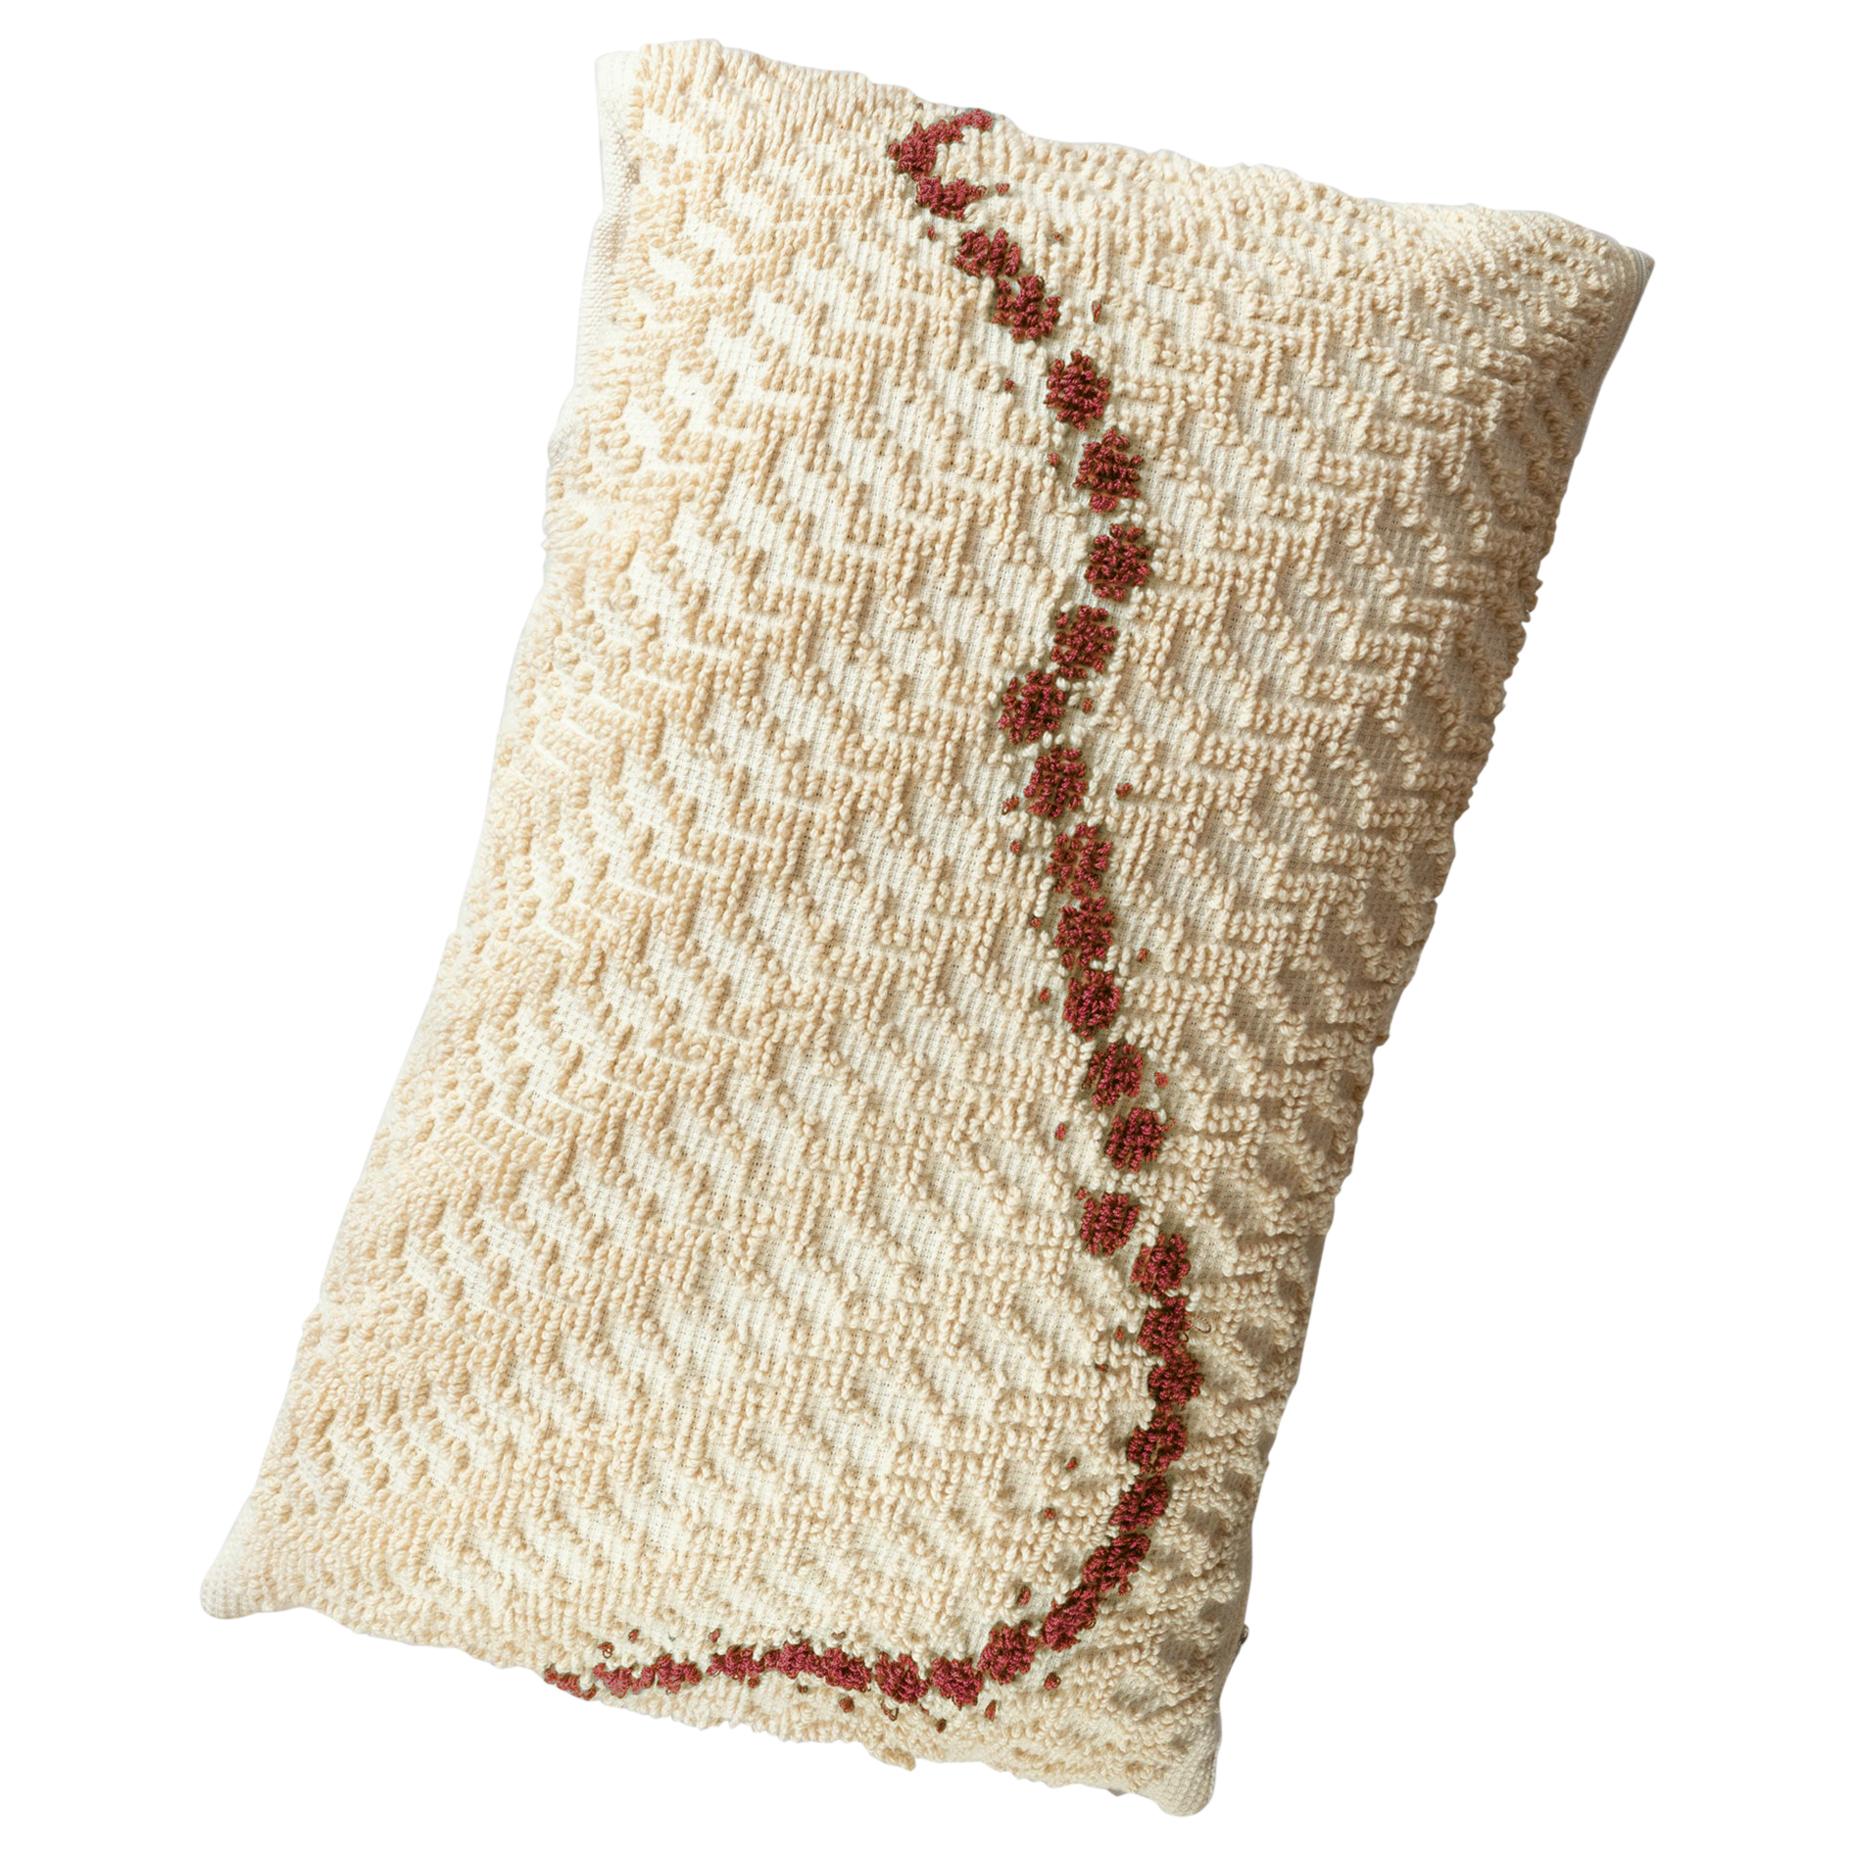 ORMA, Natural White and Brown Cotton Cushion